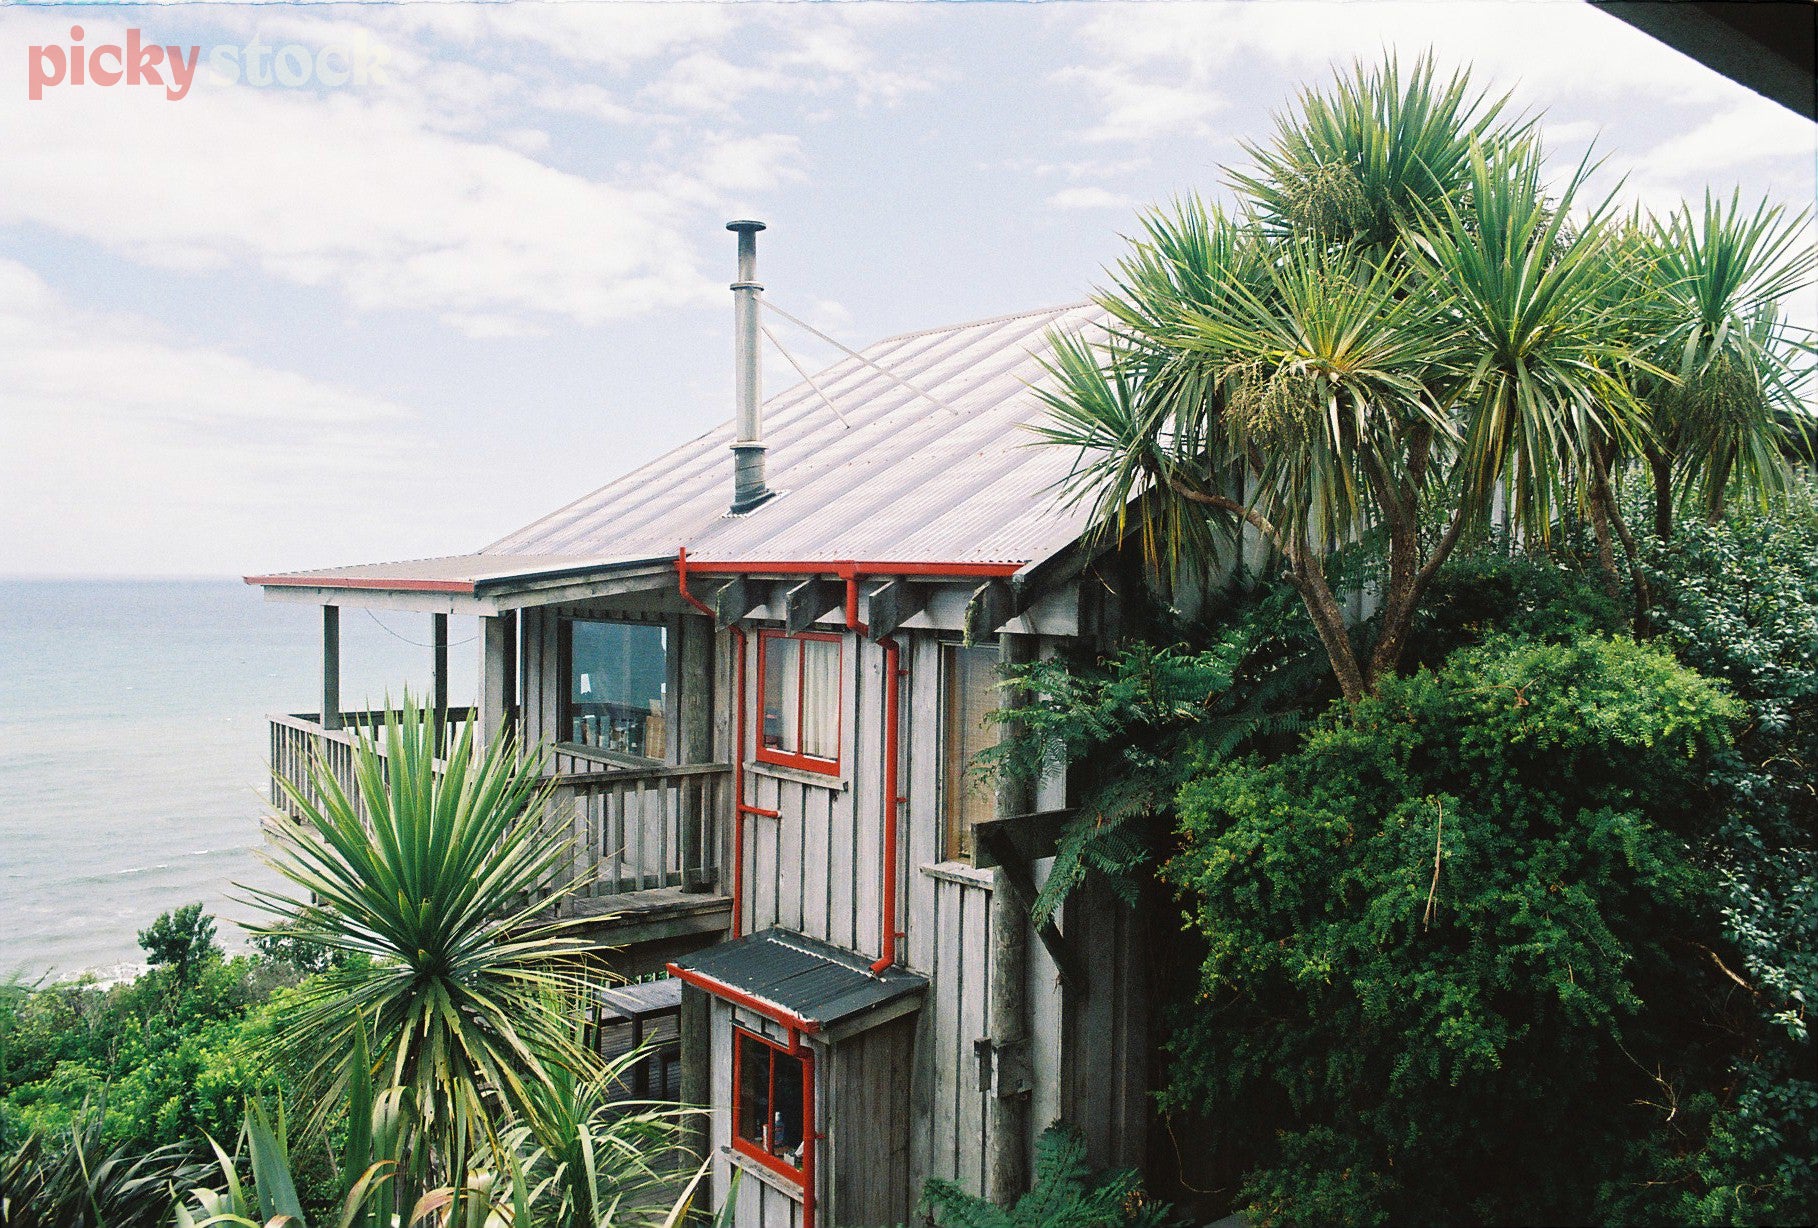 Looking out over a classic Lookwood style, double-story beach house on the coast. The house has red joinery and overlooks the ocean. Cabbage trees sit against the back of the house. 